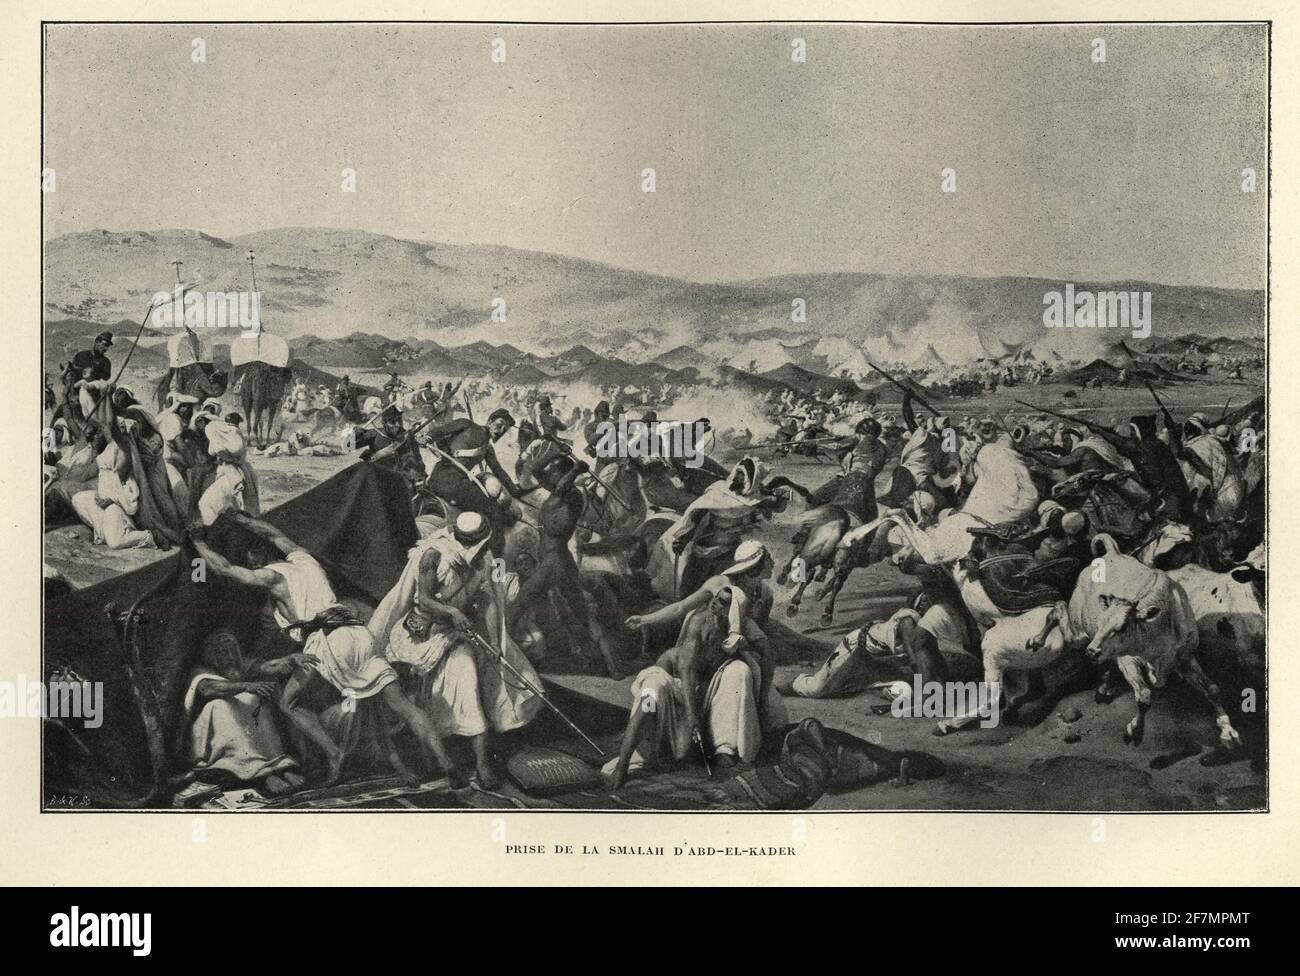 The Battle of the Smala was fought in 1843 between France and Algerian resistance fighters during the French conquest of Algeria. Stock Photo